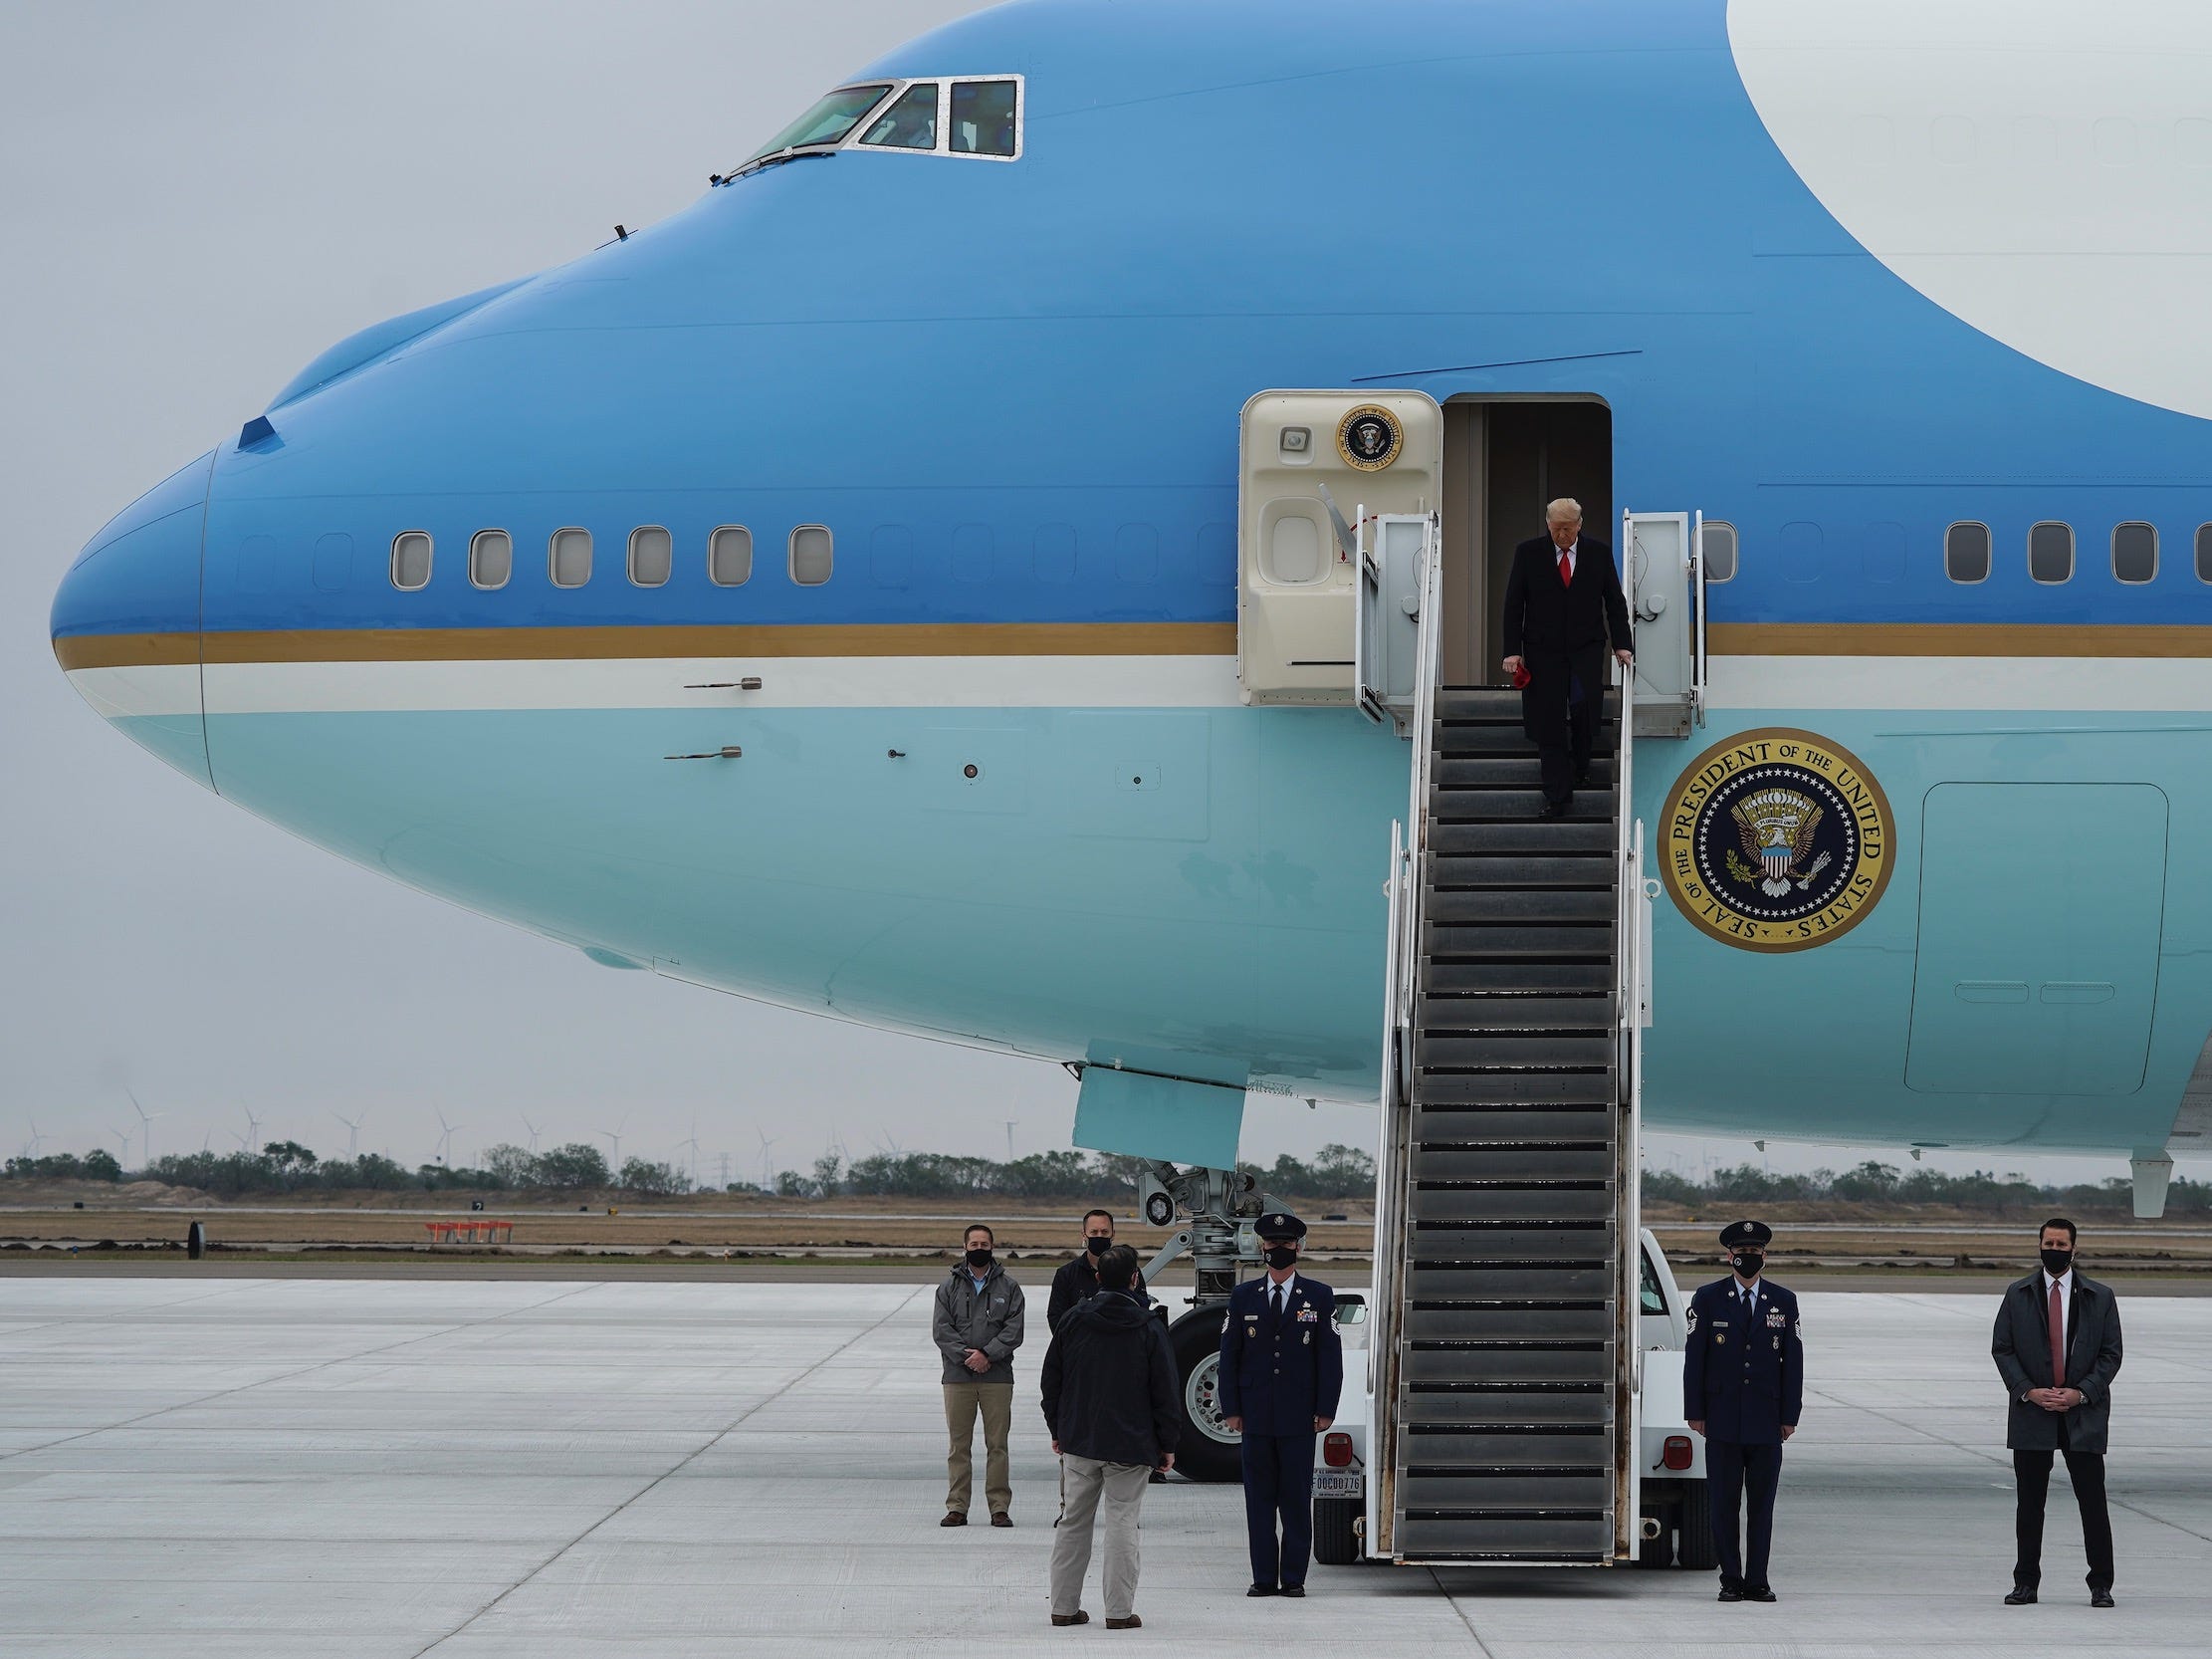 Trump stepping off Air Force One.